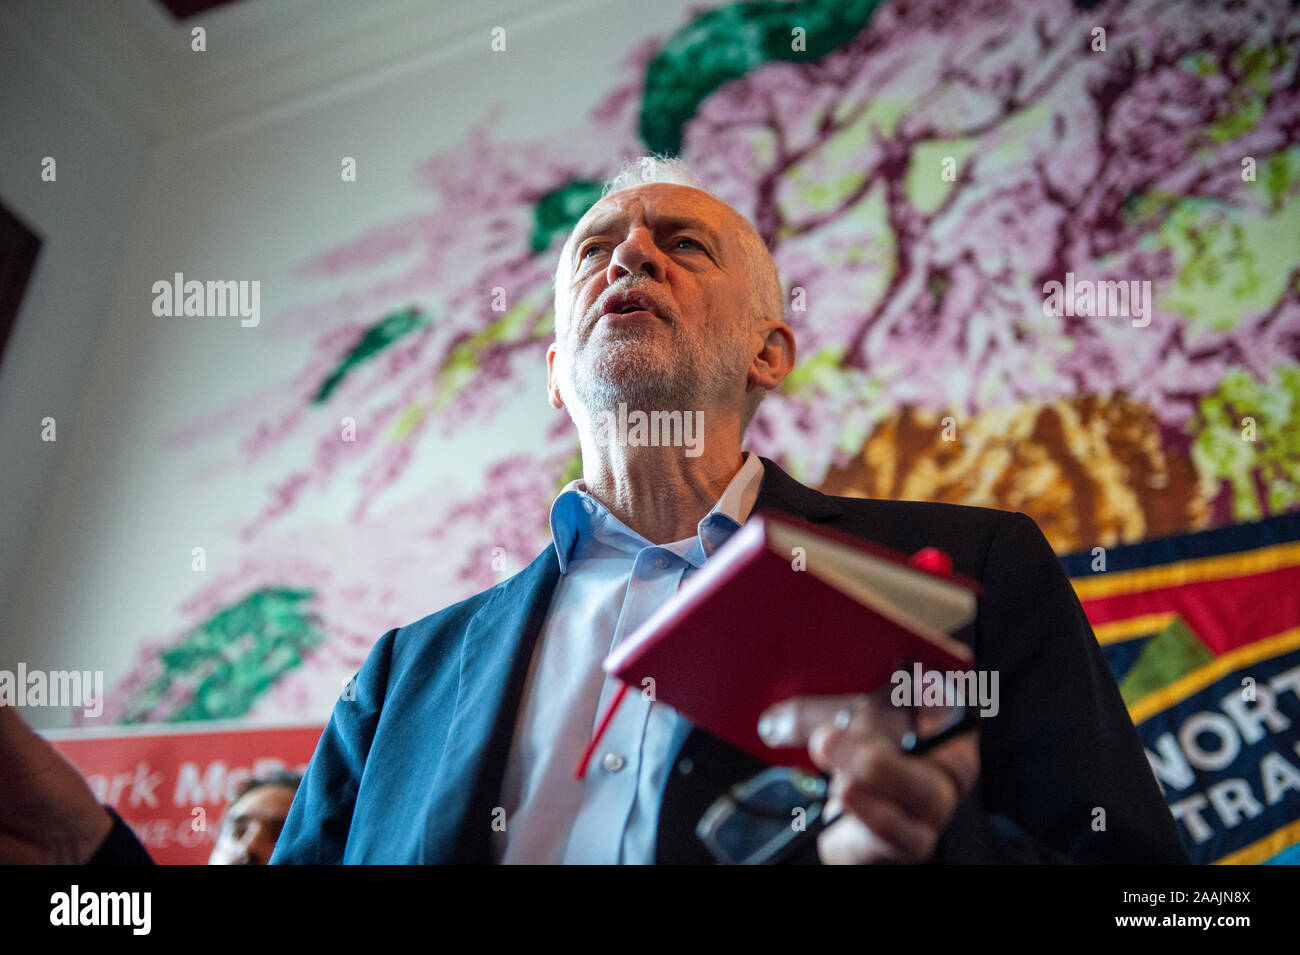 Staffordshire, UK. 22 November 2019. Labour leader Jeremy Corbyn at a Labour rally in Fenton, Stoke-on-Trent. The Stoke South seat is marginal with the Conservatives holding a majority of just over 600 votes. Credit: Benjamin Wareing/ Alamy Live News Stock Photo